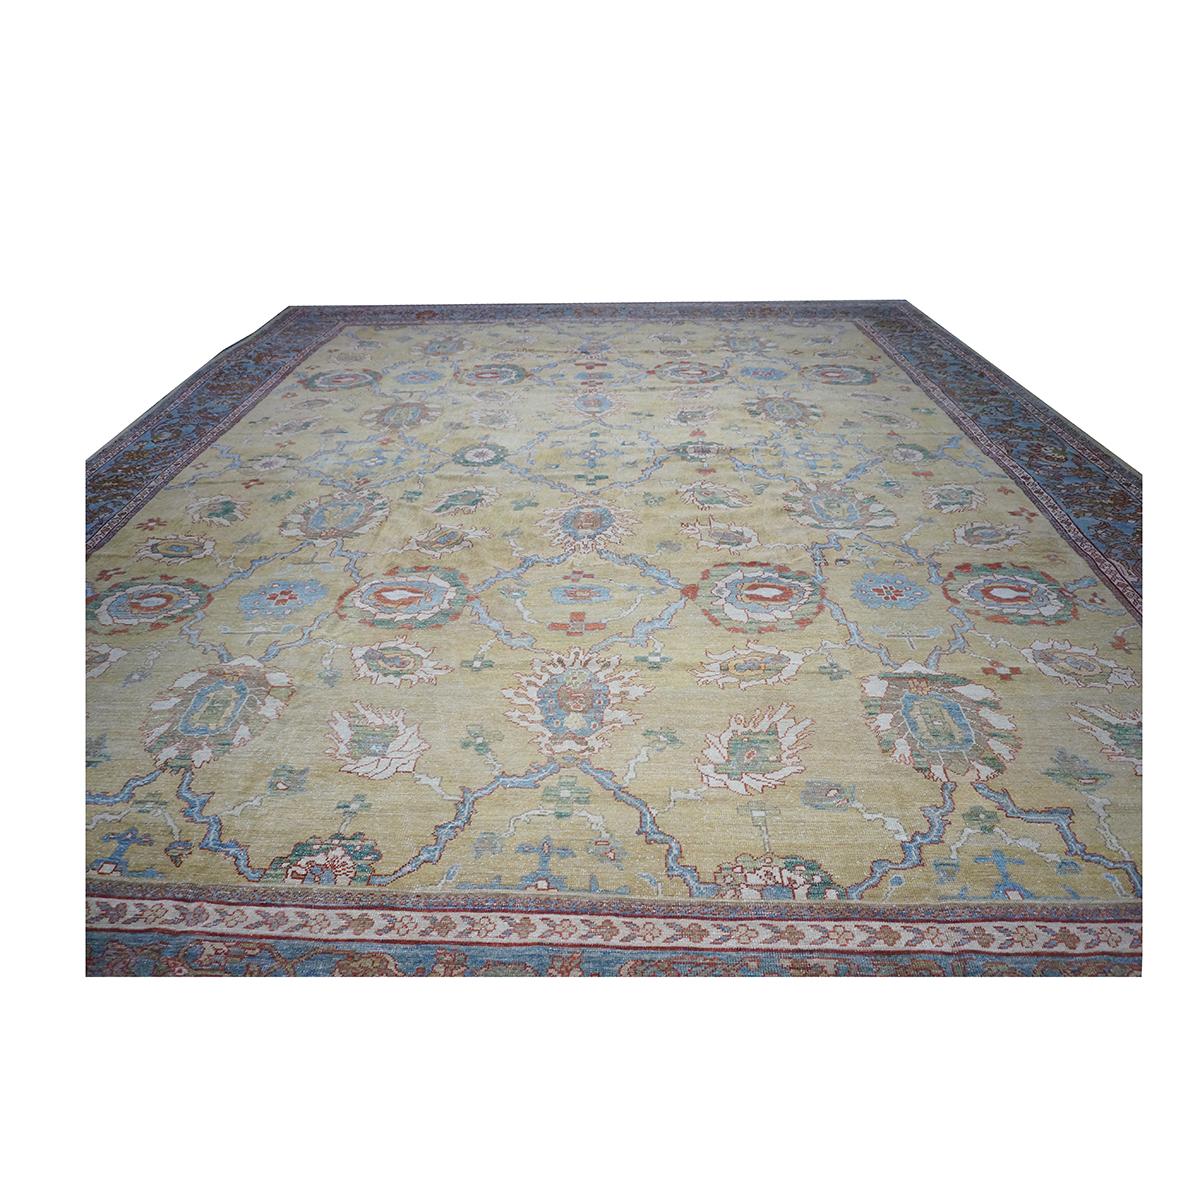 Ashly Fine Rugs presents a beautiful Antique Persian Sultanabad 16x19 Handmade Area Rug #1142157. Sultanabad carpets are classics in the world of interior design, and they continue to be used in many new and exciting ways in today's trendy